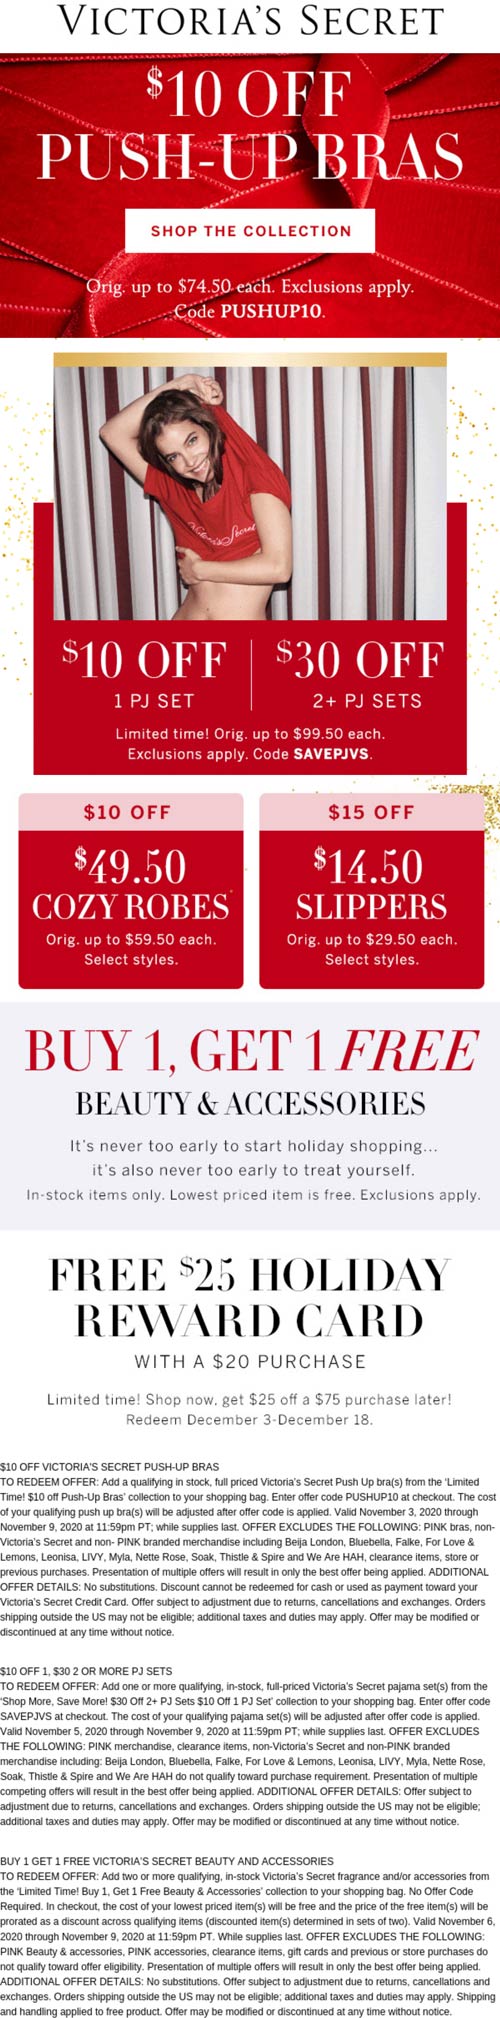 Second beauty free, 10 off push up bras, PJ sets & more at Victorias